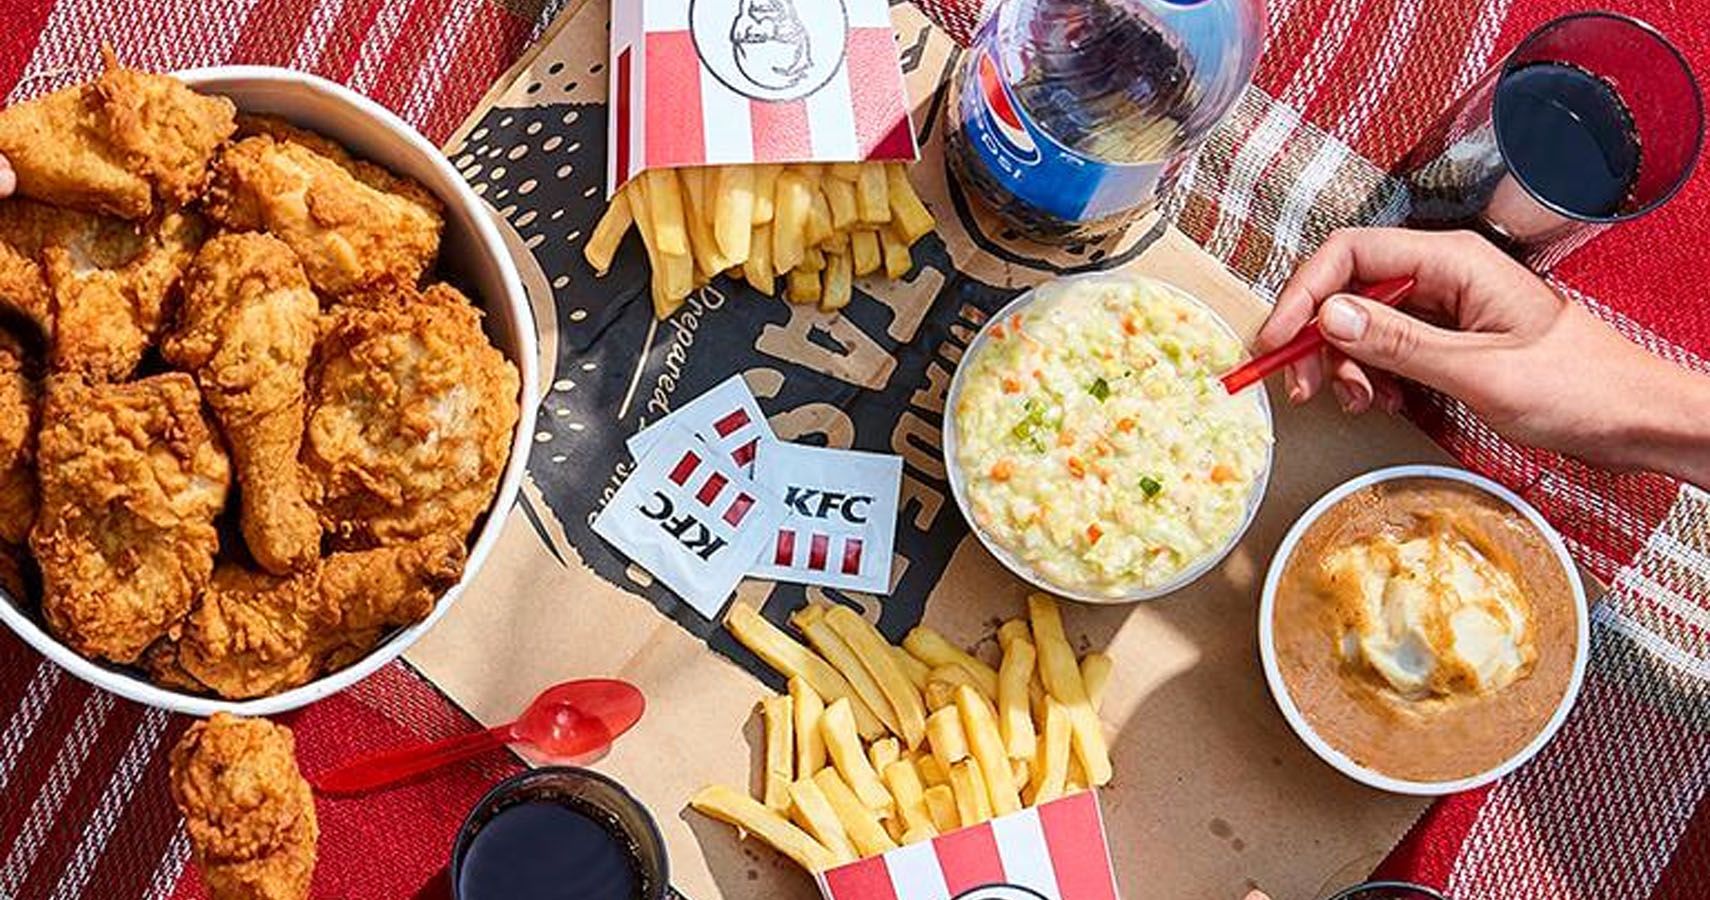 Finger-Lickin' Good: Ranking KFC's Menu Items From 25th to 1st